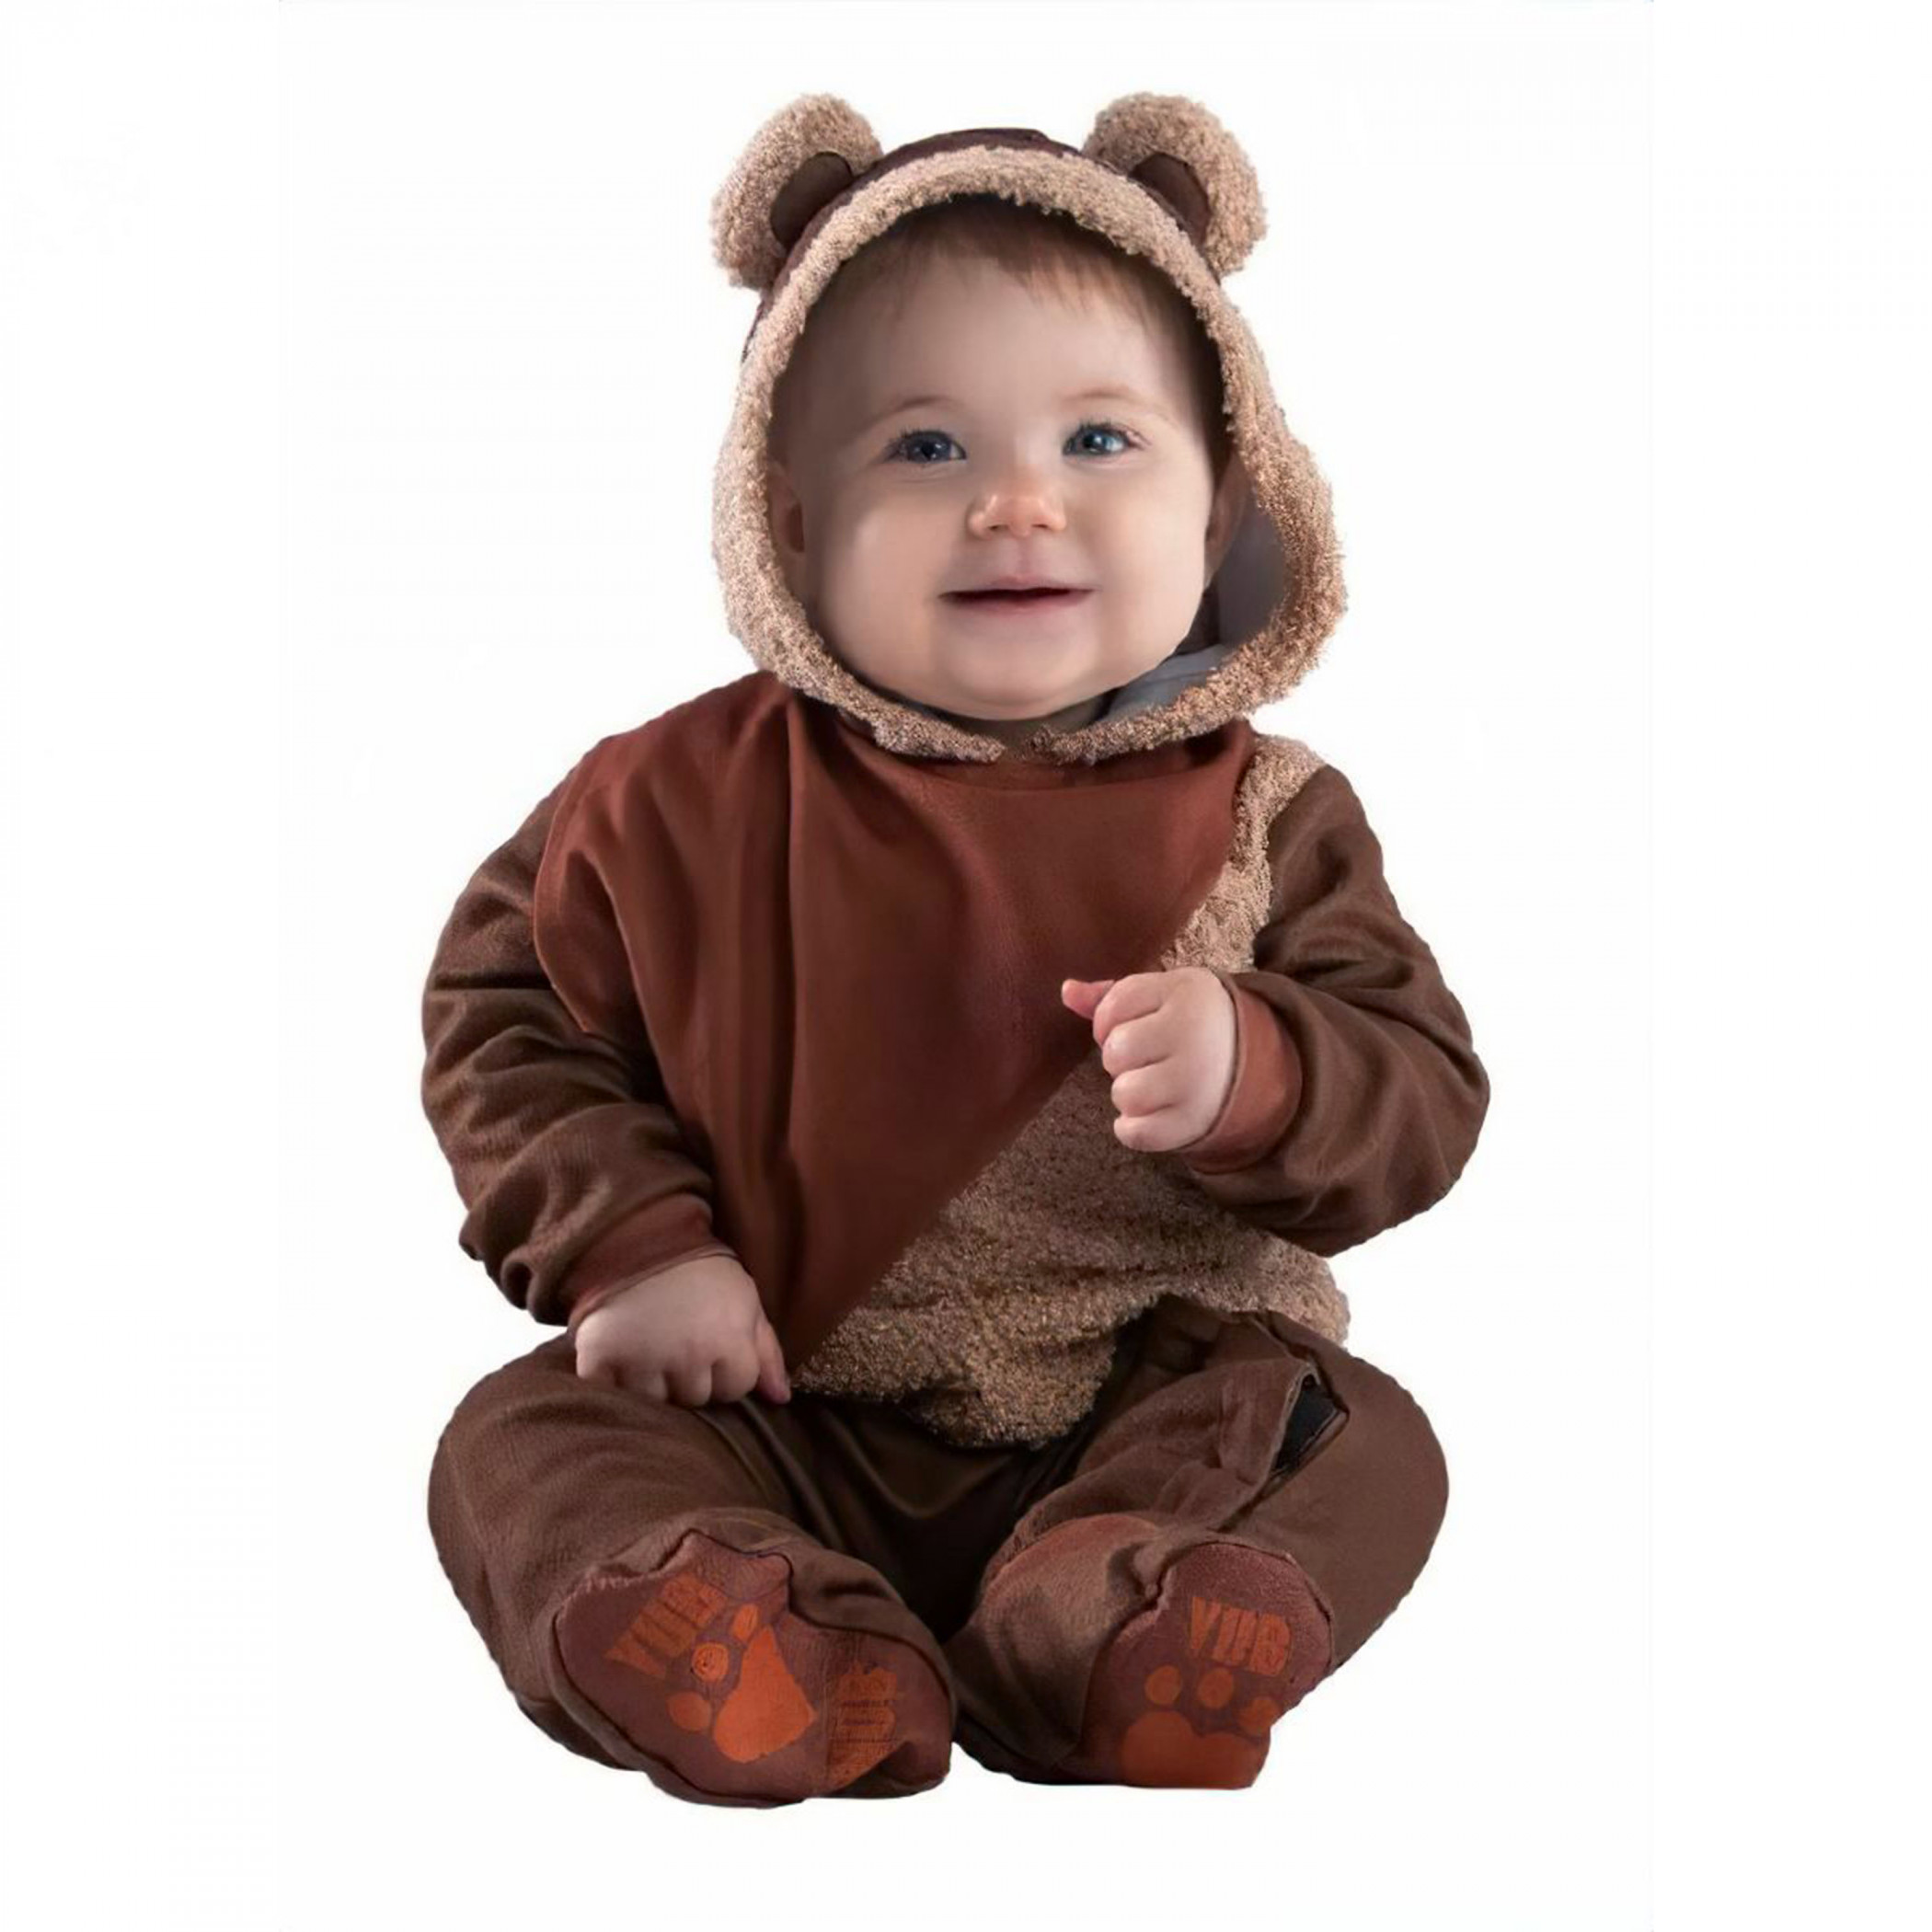 Star Wars Ewok Infant Costume with Non-Slip Booties